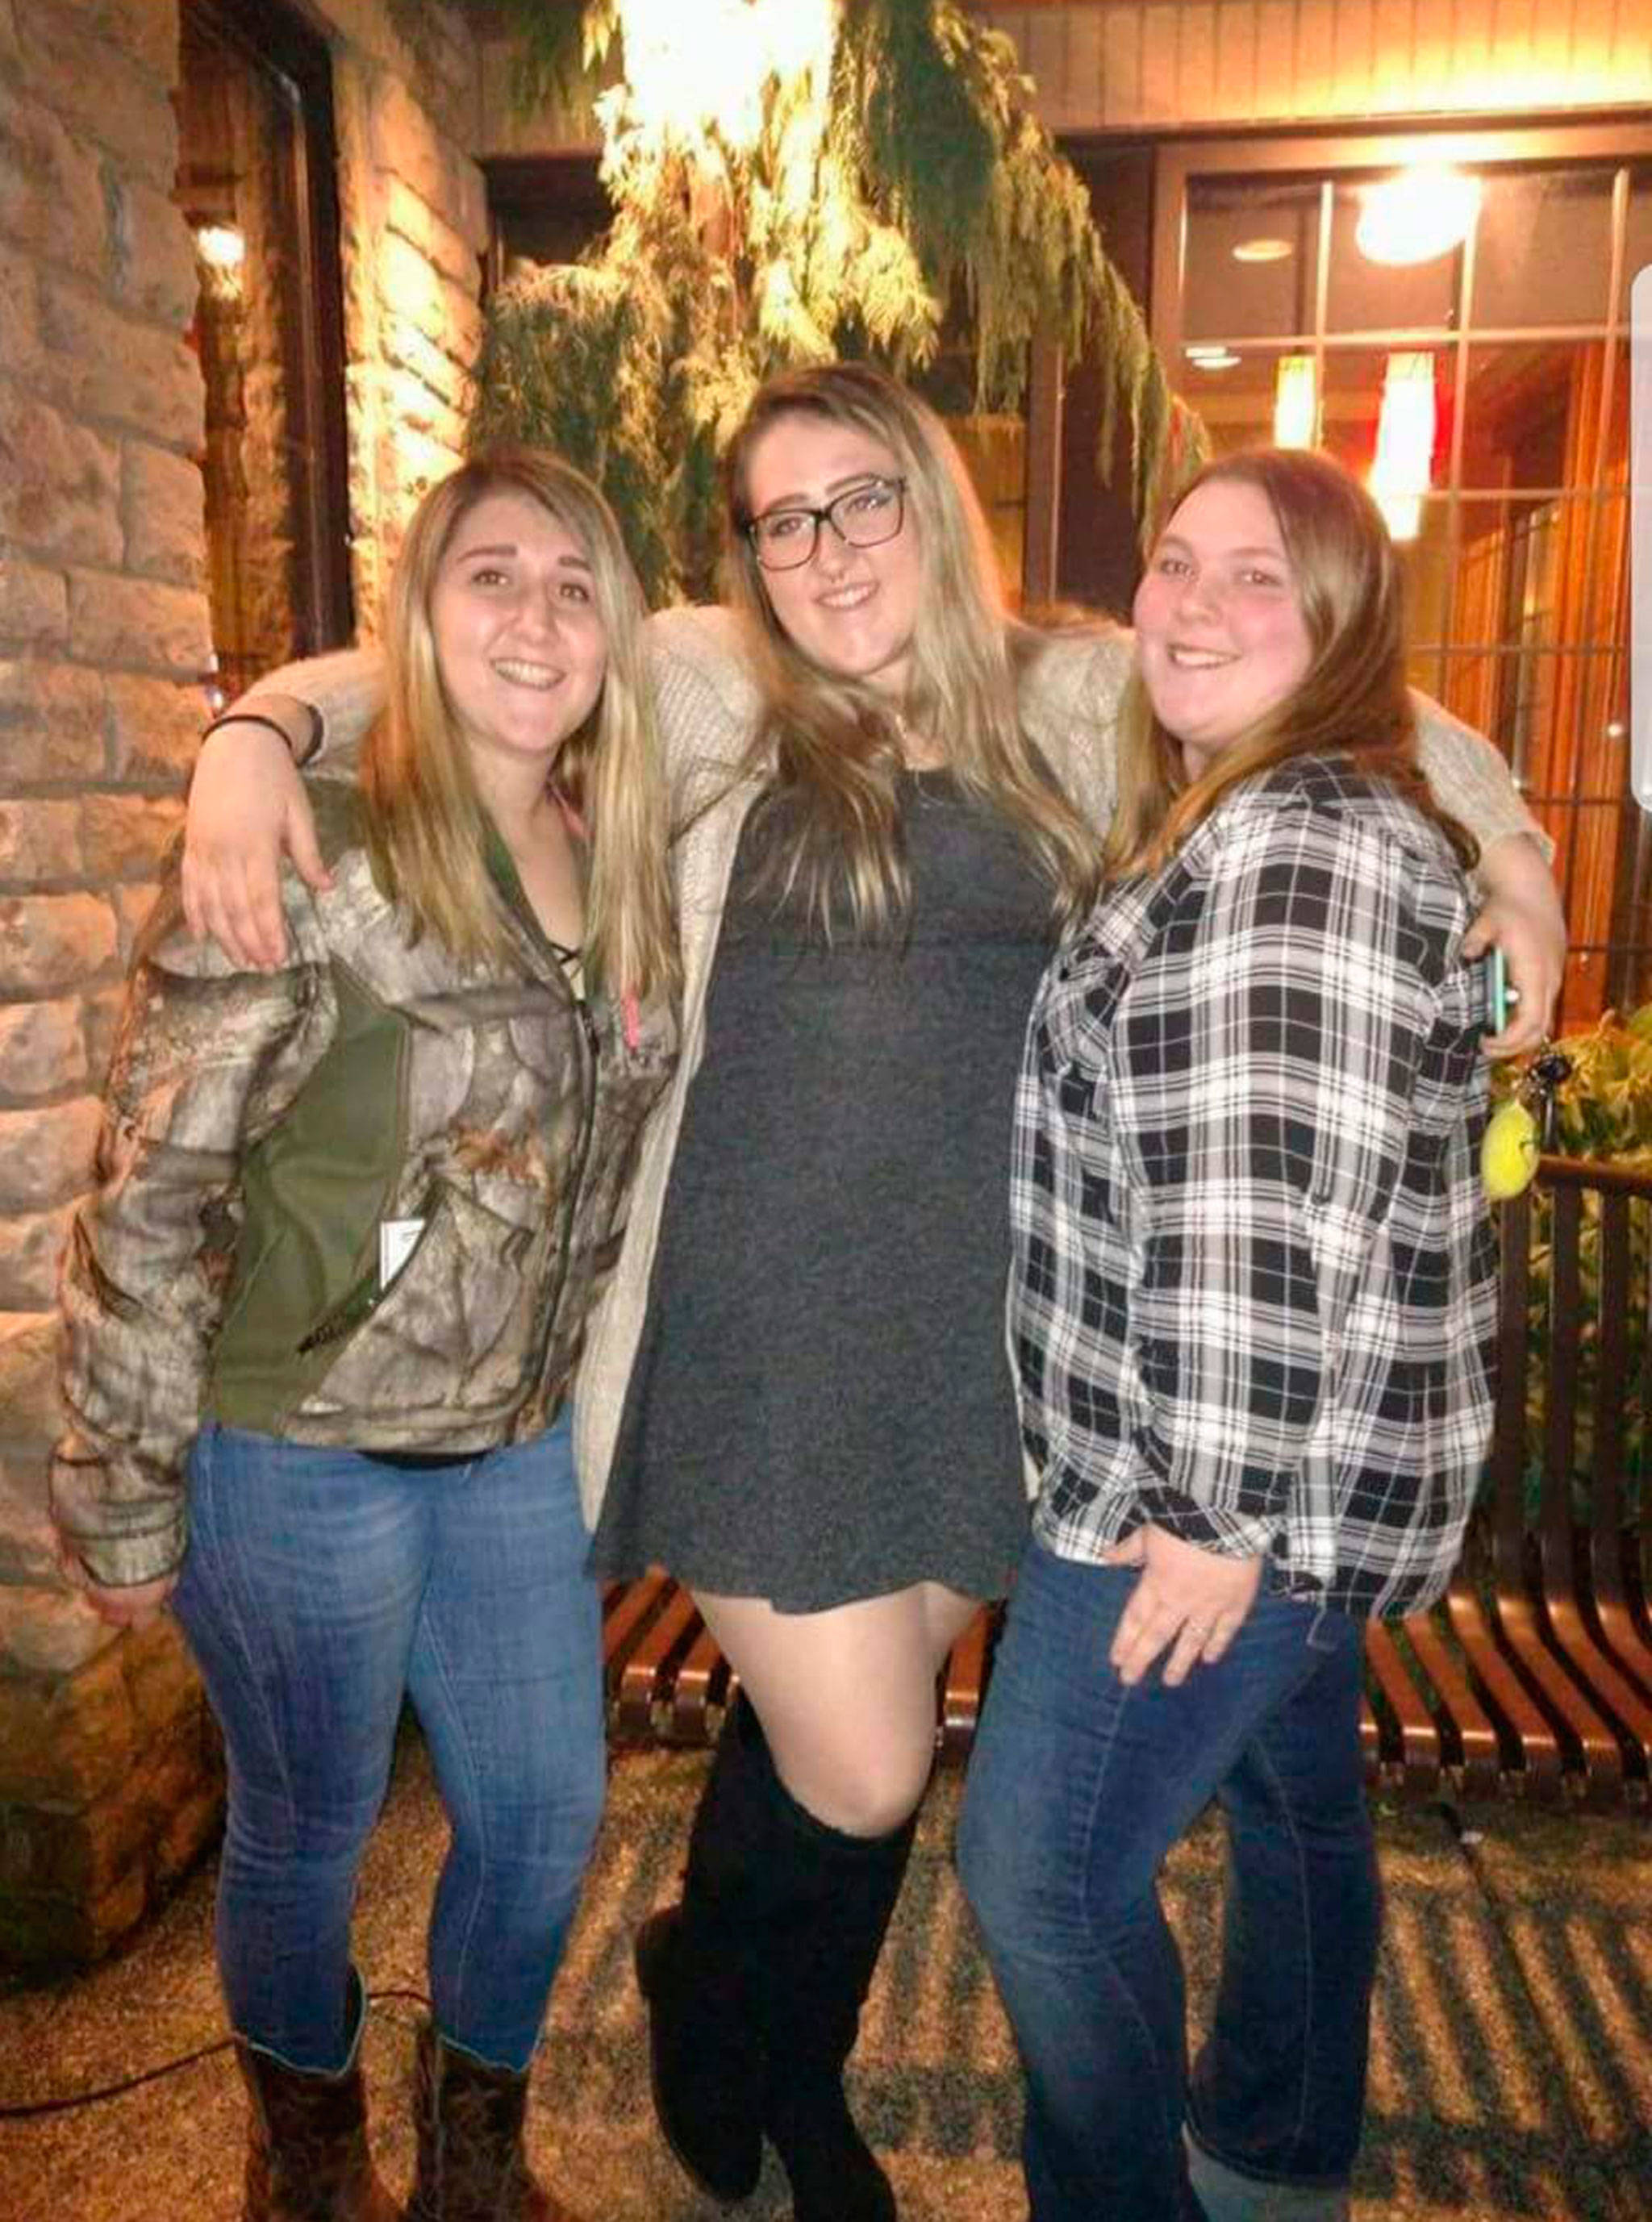 Brooke Bedinger, right, poses in a photo with her cousins Andrea Kienholz, left, and Tristi Kienholz who were close with Brooke growing up until present. Andrea and Tristi say they shared a sisterly bond with Brooke. Submitted photo